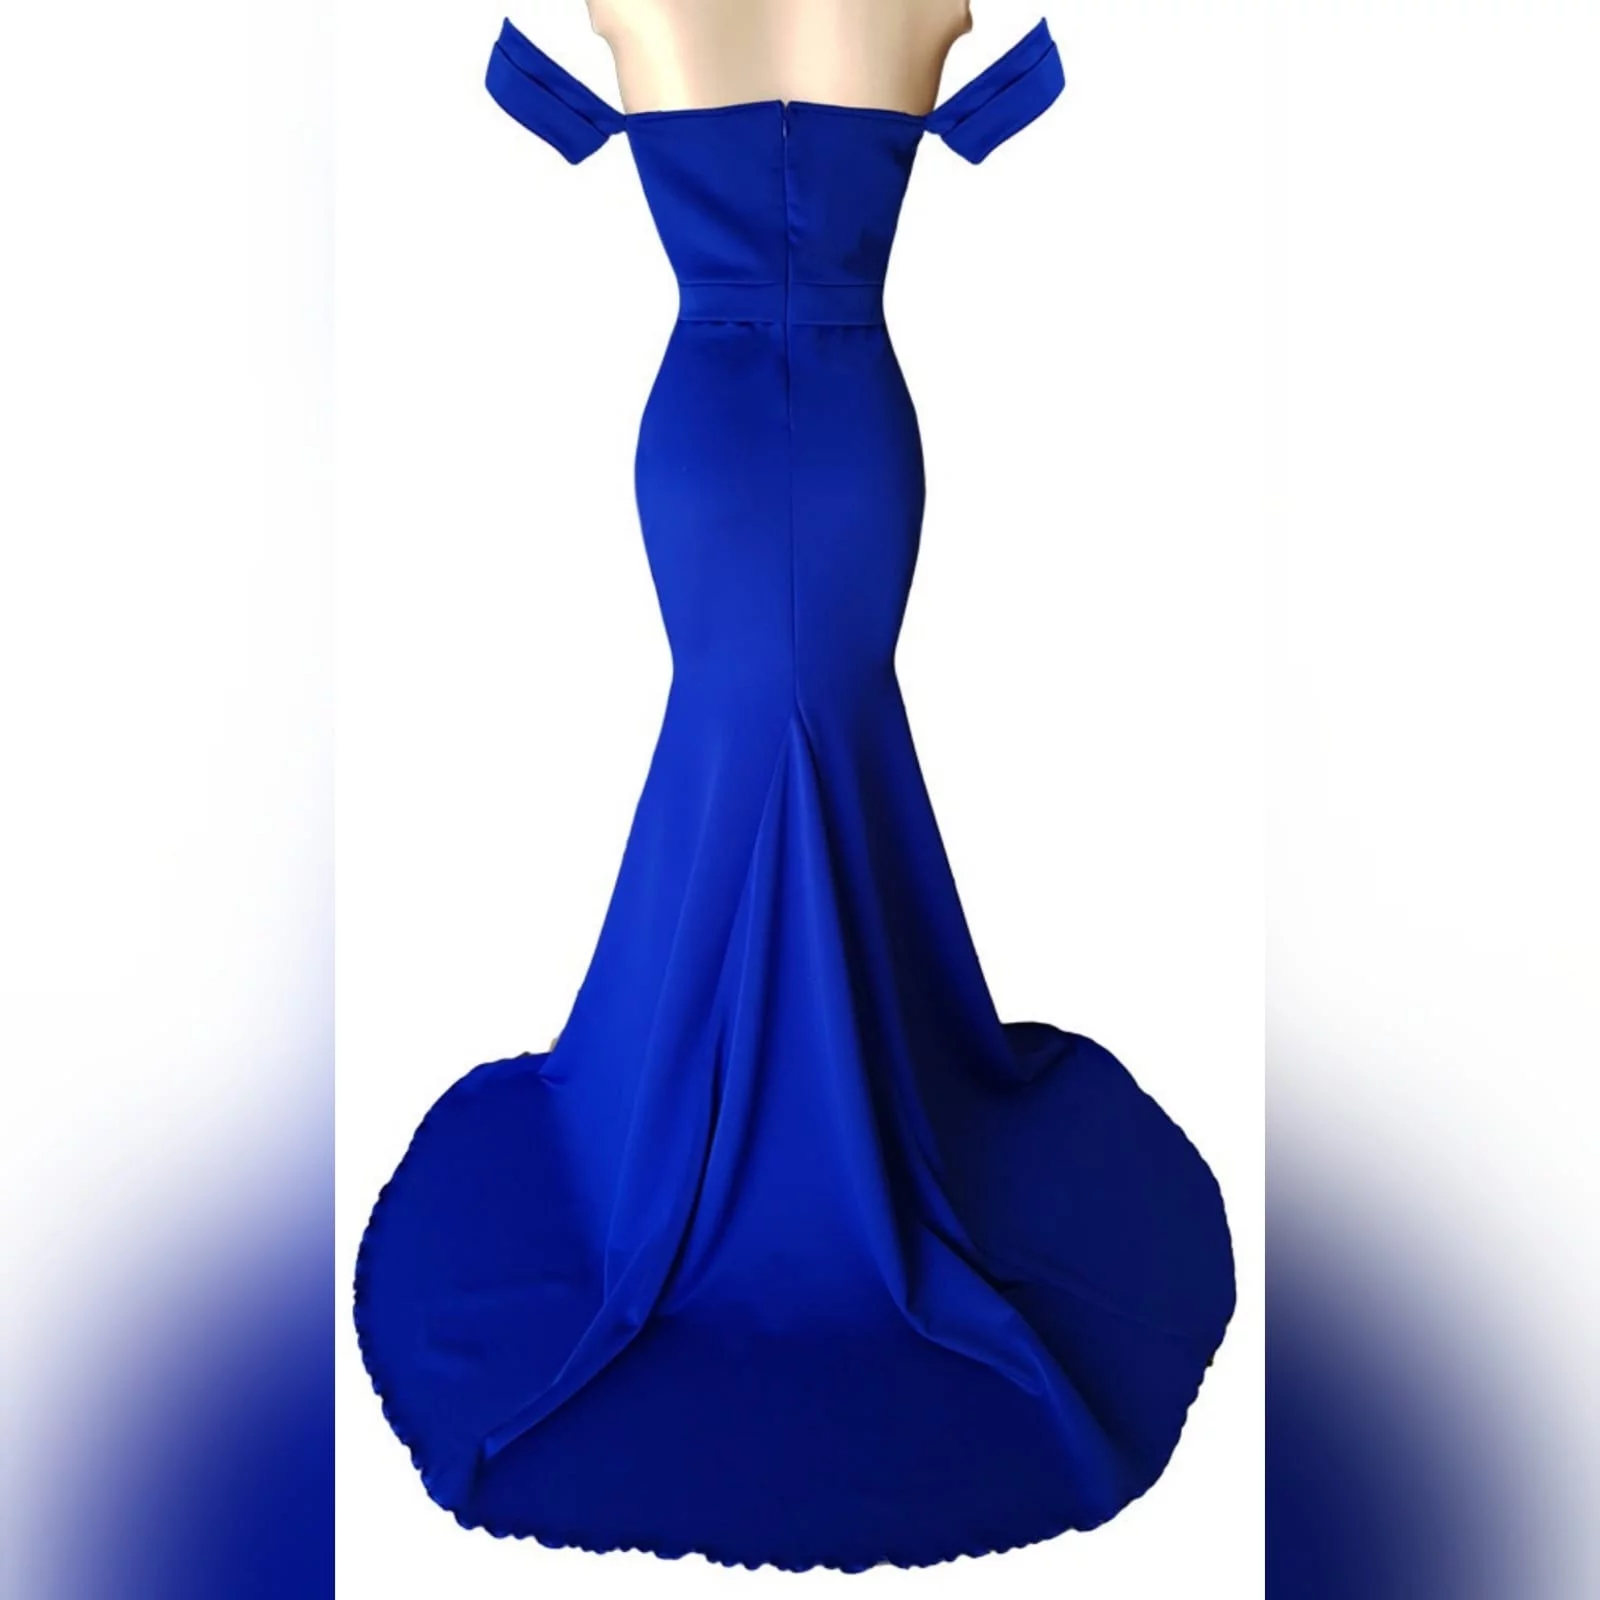 Simple royal blue soft mermaid dress 5 a simple royal blue soft mermaid dress, created for a debutantes ball. With a modern off-shoulder neckline and off-shoulder short sleeves. A belt effect to enhance the waist and a train for a touch of drama.